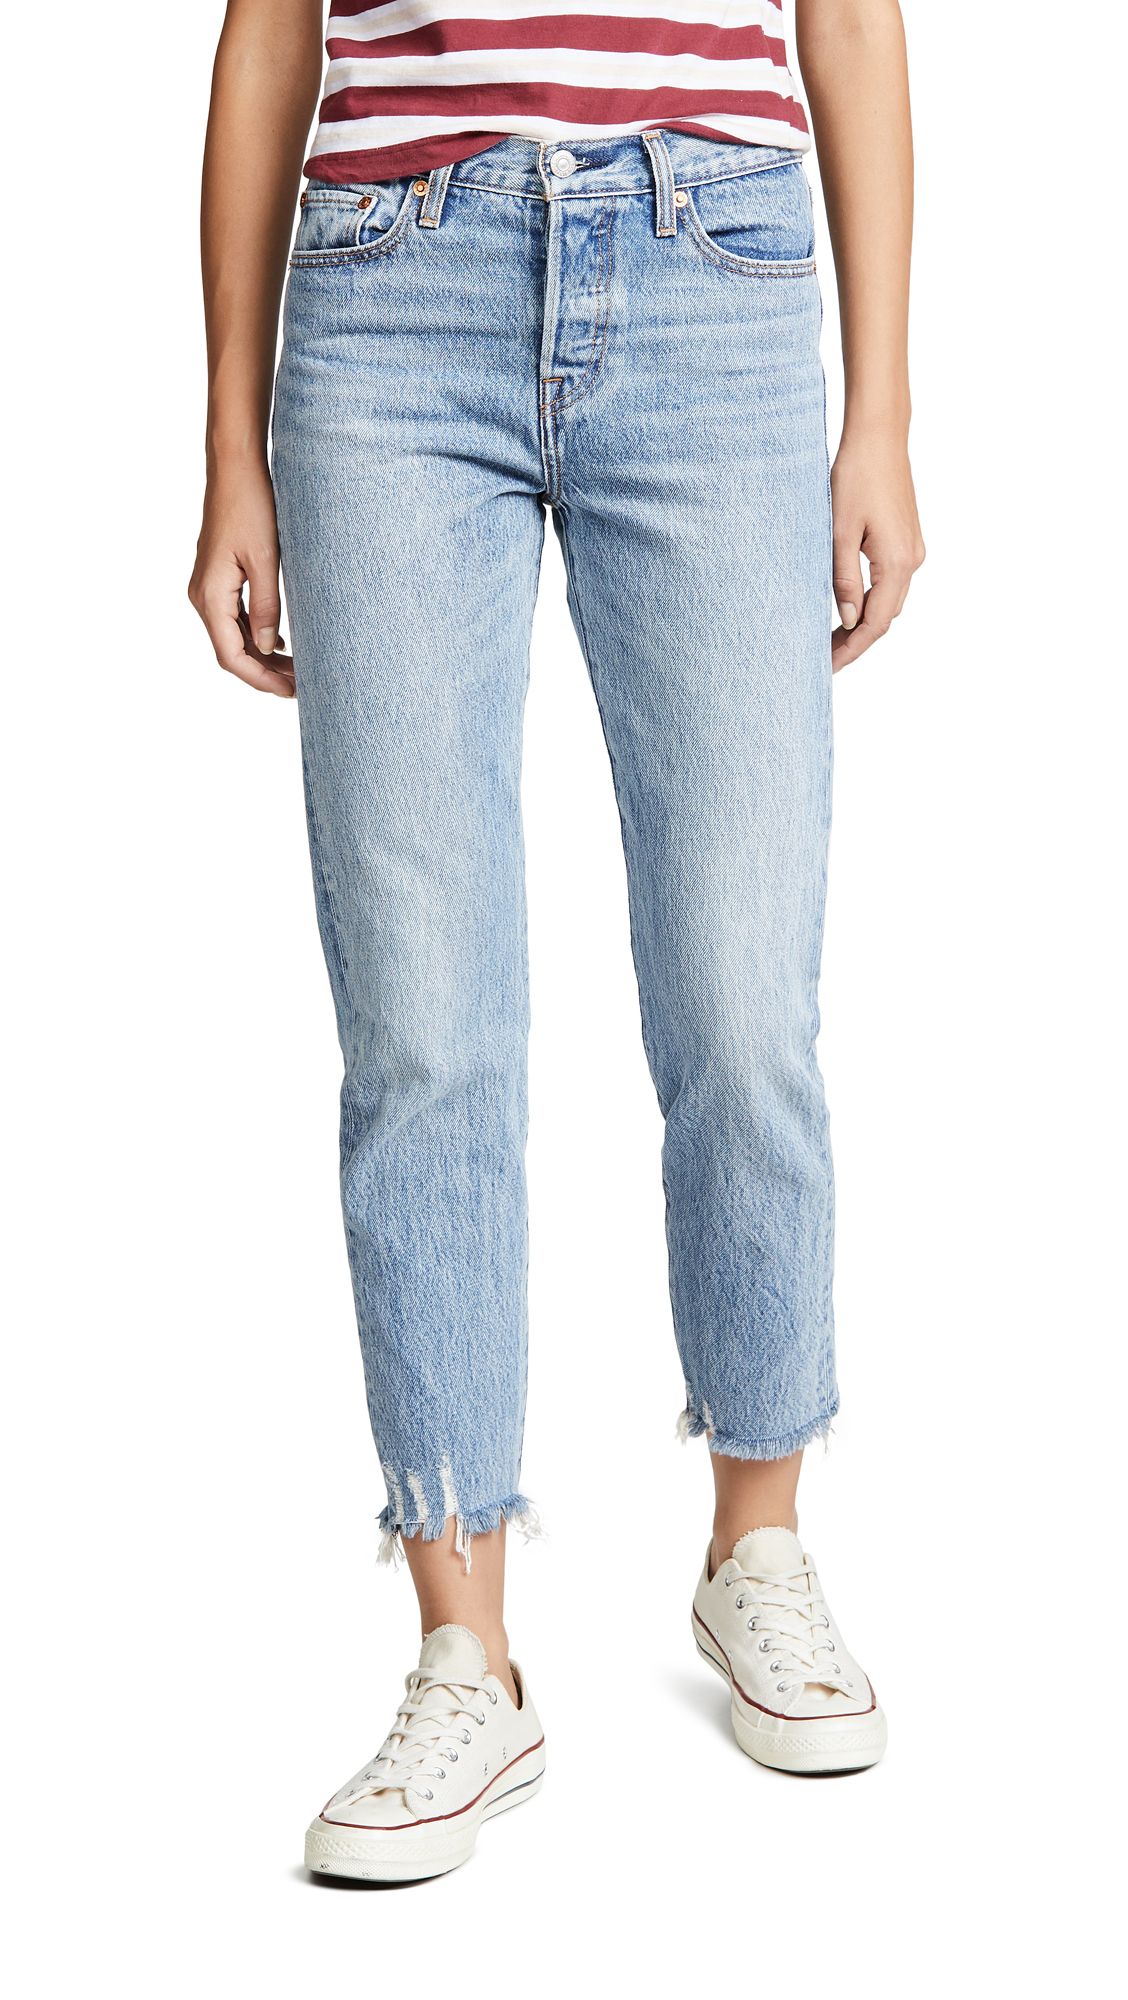 Levi's Wedgie Icon Jeans | Shopbop